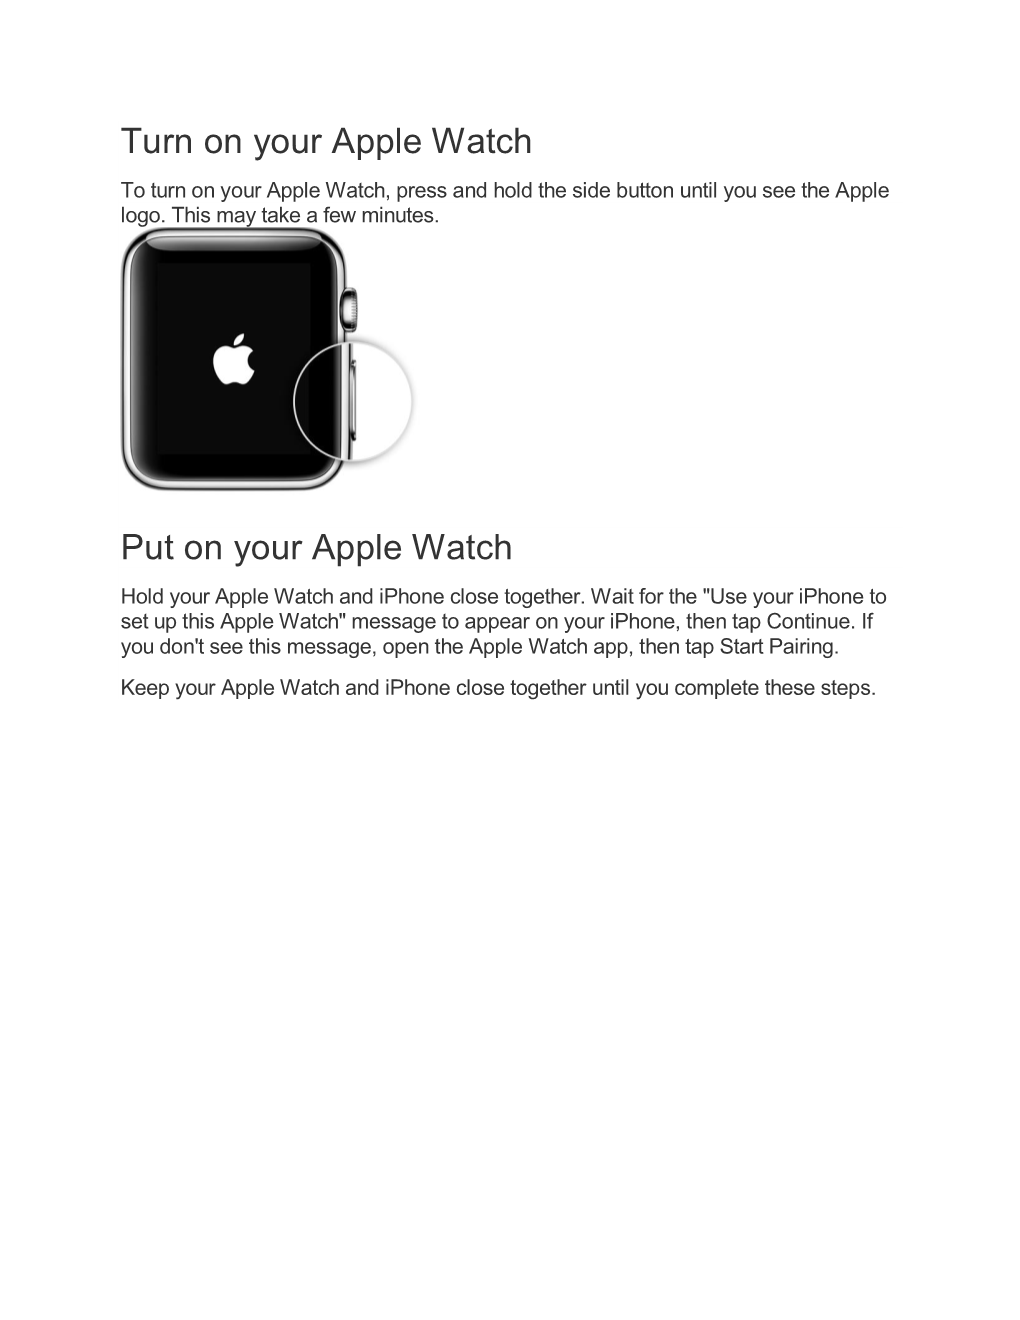 Turn on Your Apple Watch Put on Your Apple Watch